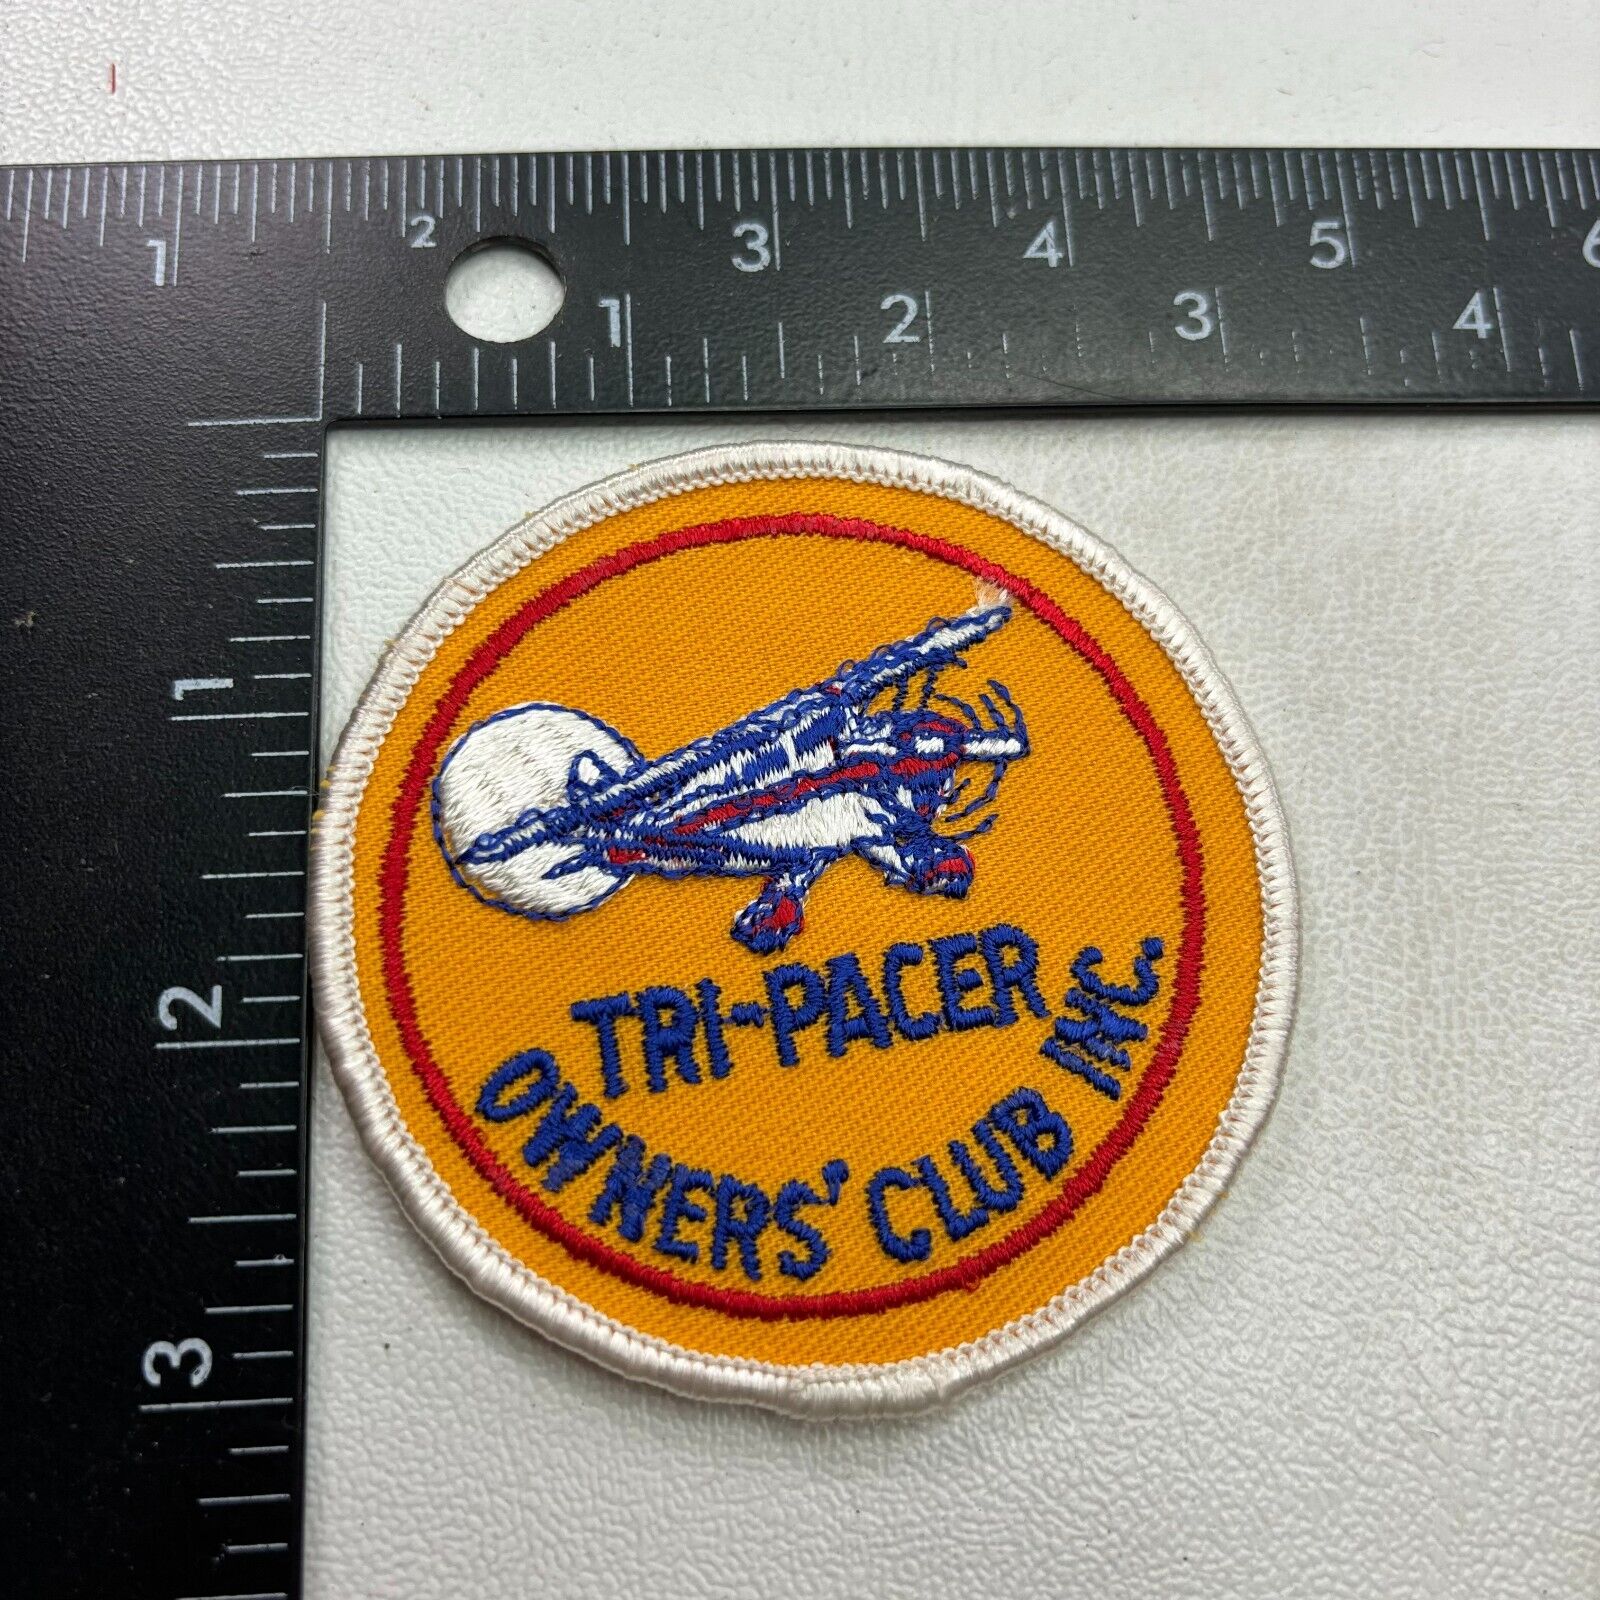 Vintage Piper TRI-PACER OWNERS CLUB INC. Patch (Airplane, Aircraft Related) O41G